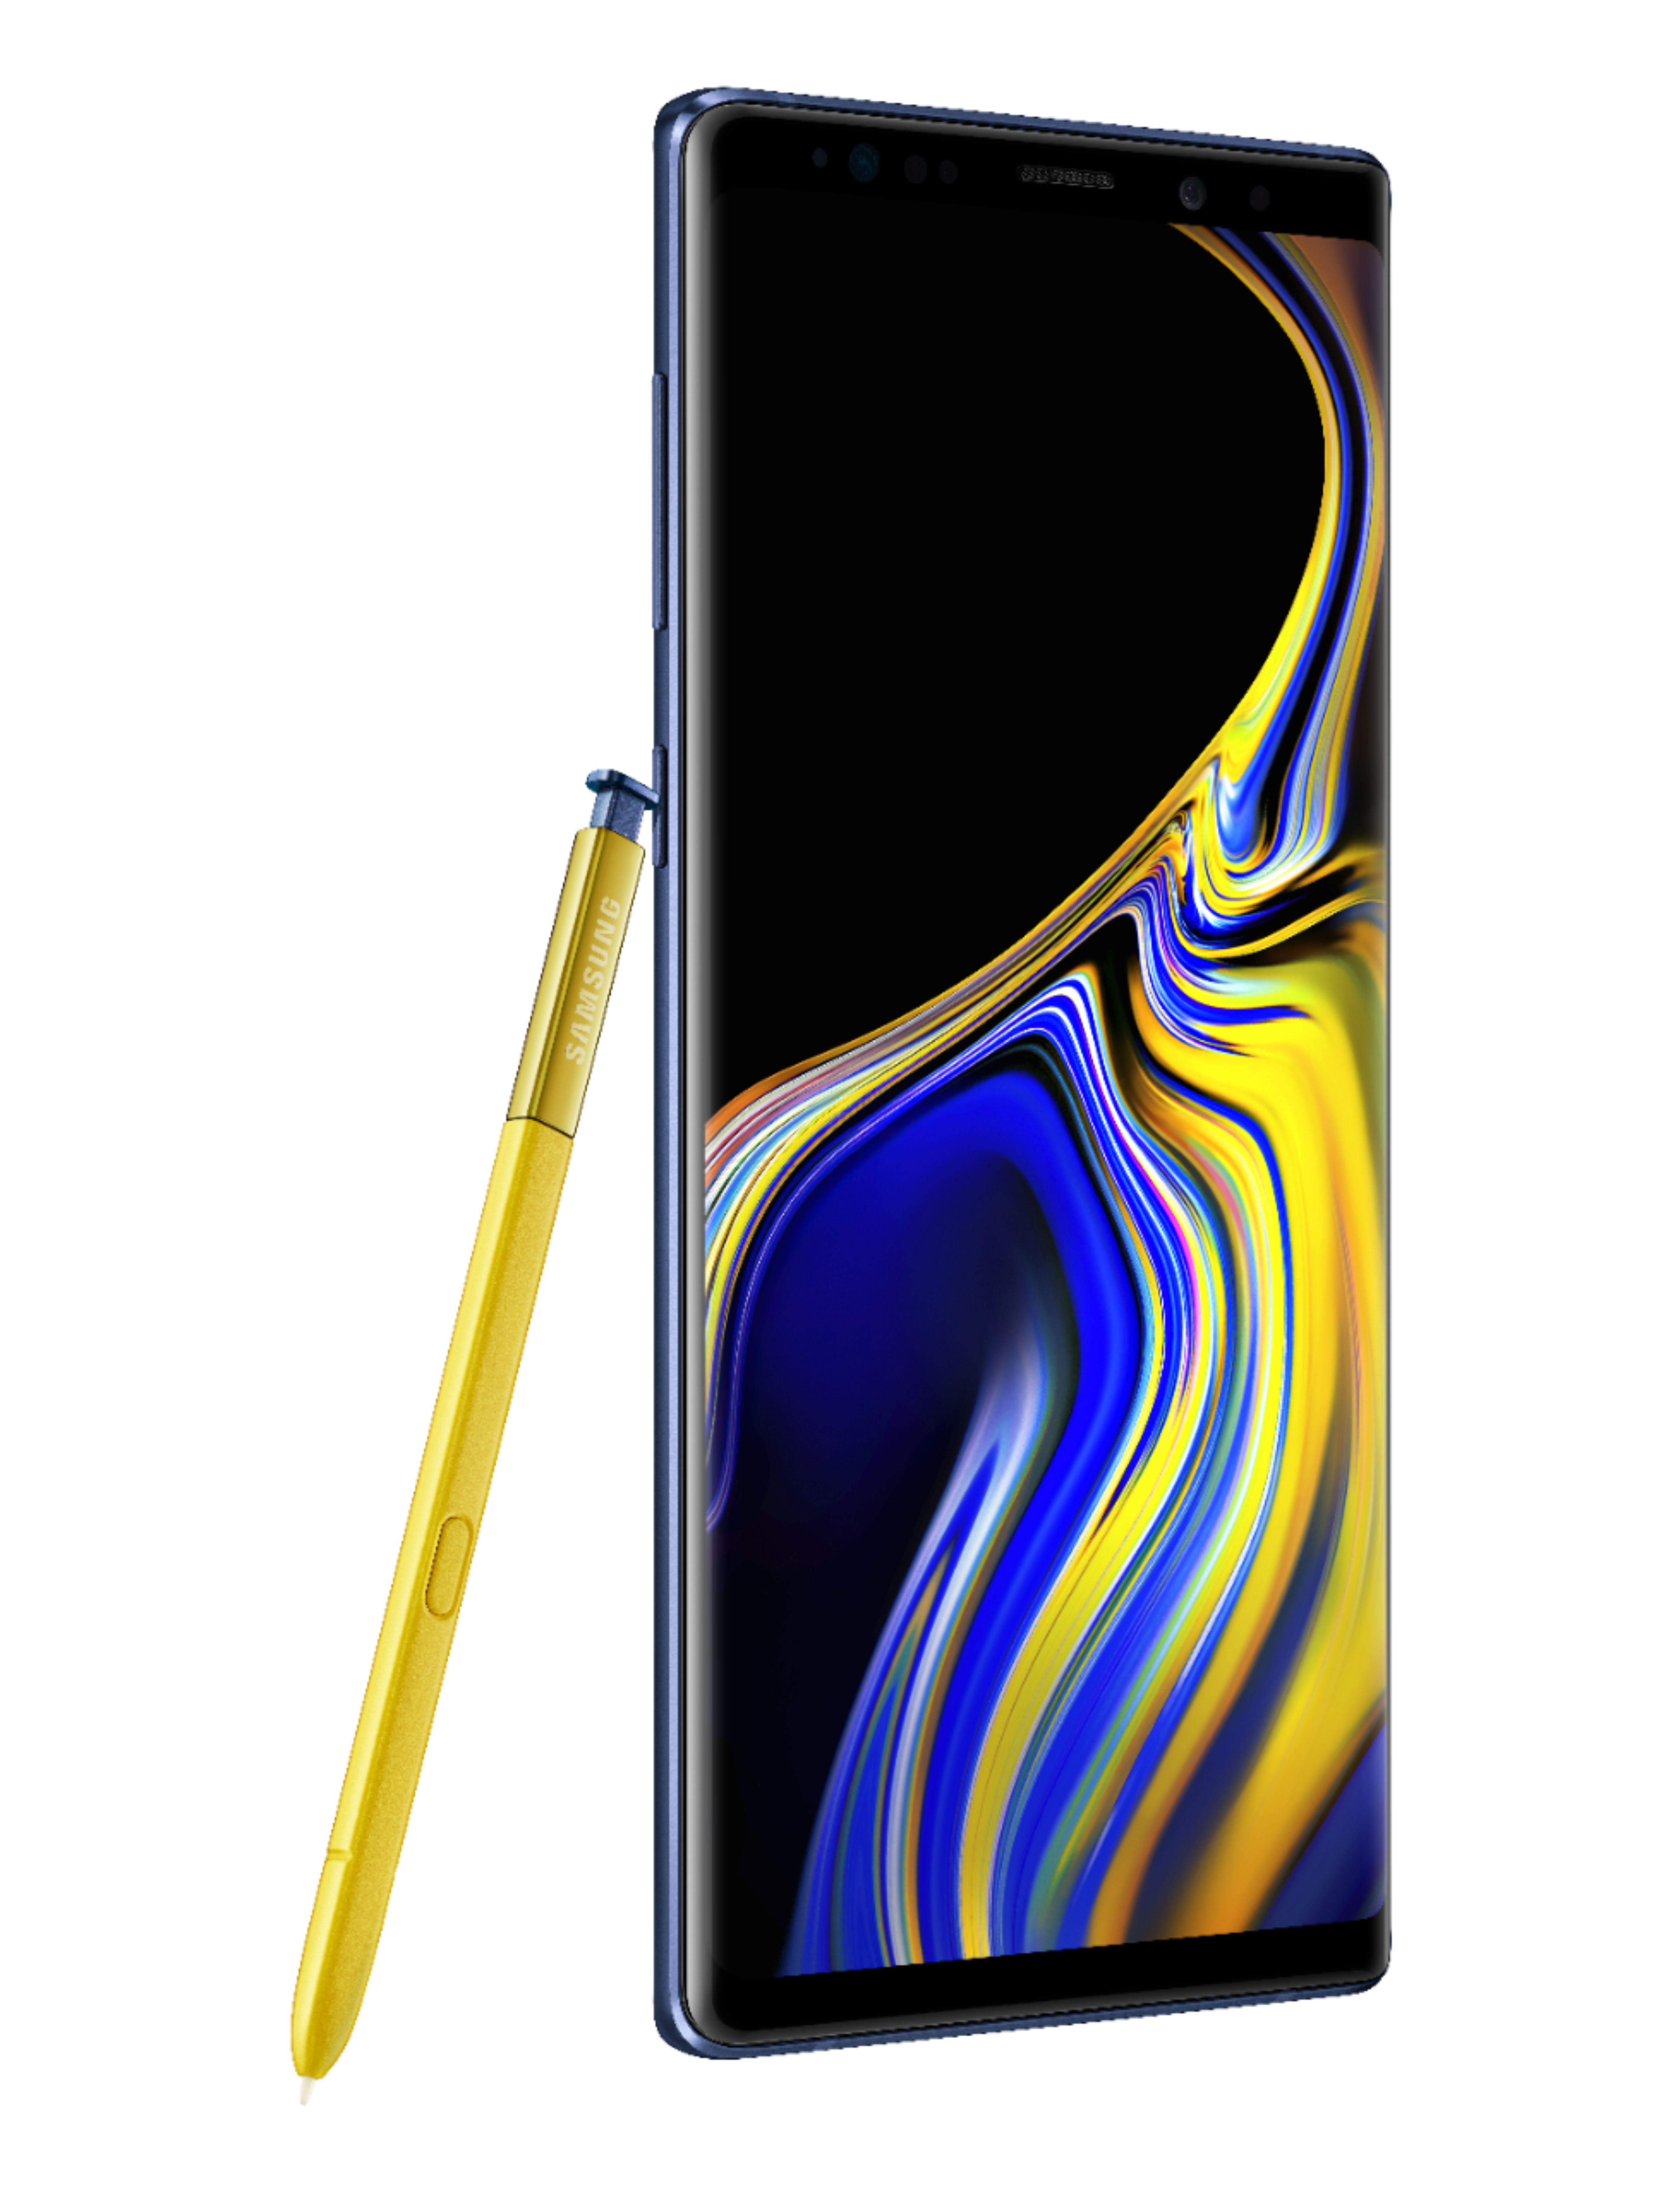 Angle View: Samsung - Geek Squad Certified Refurbished Galaxy Note9 128GB - Ocean Blue (Sprint)